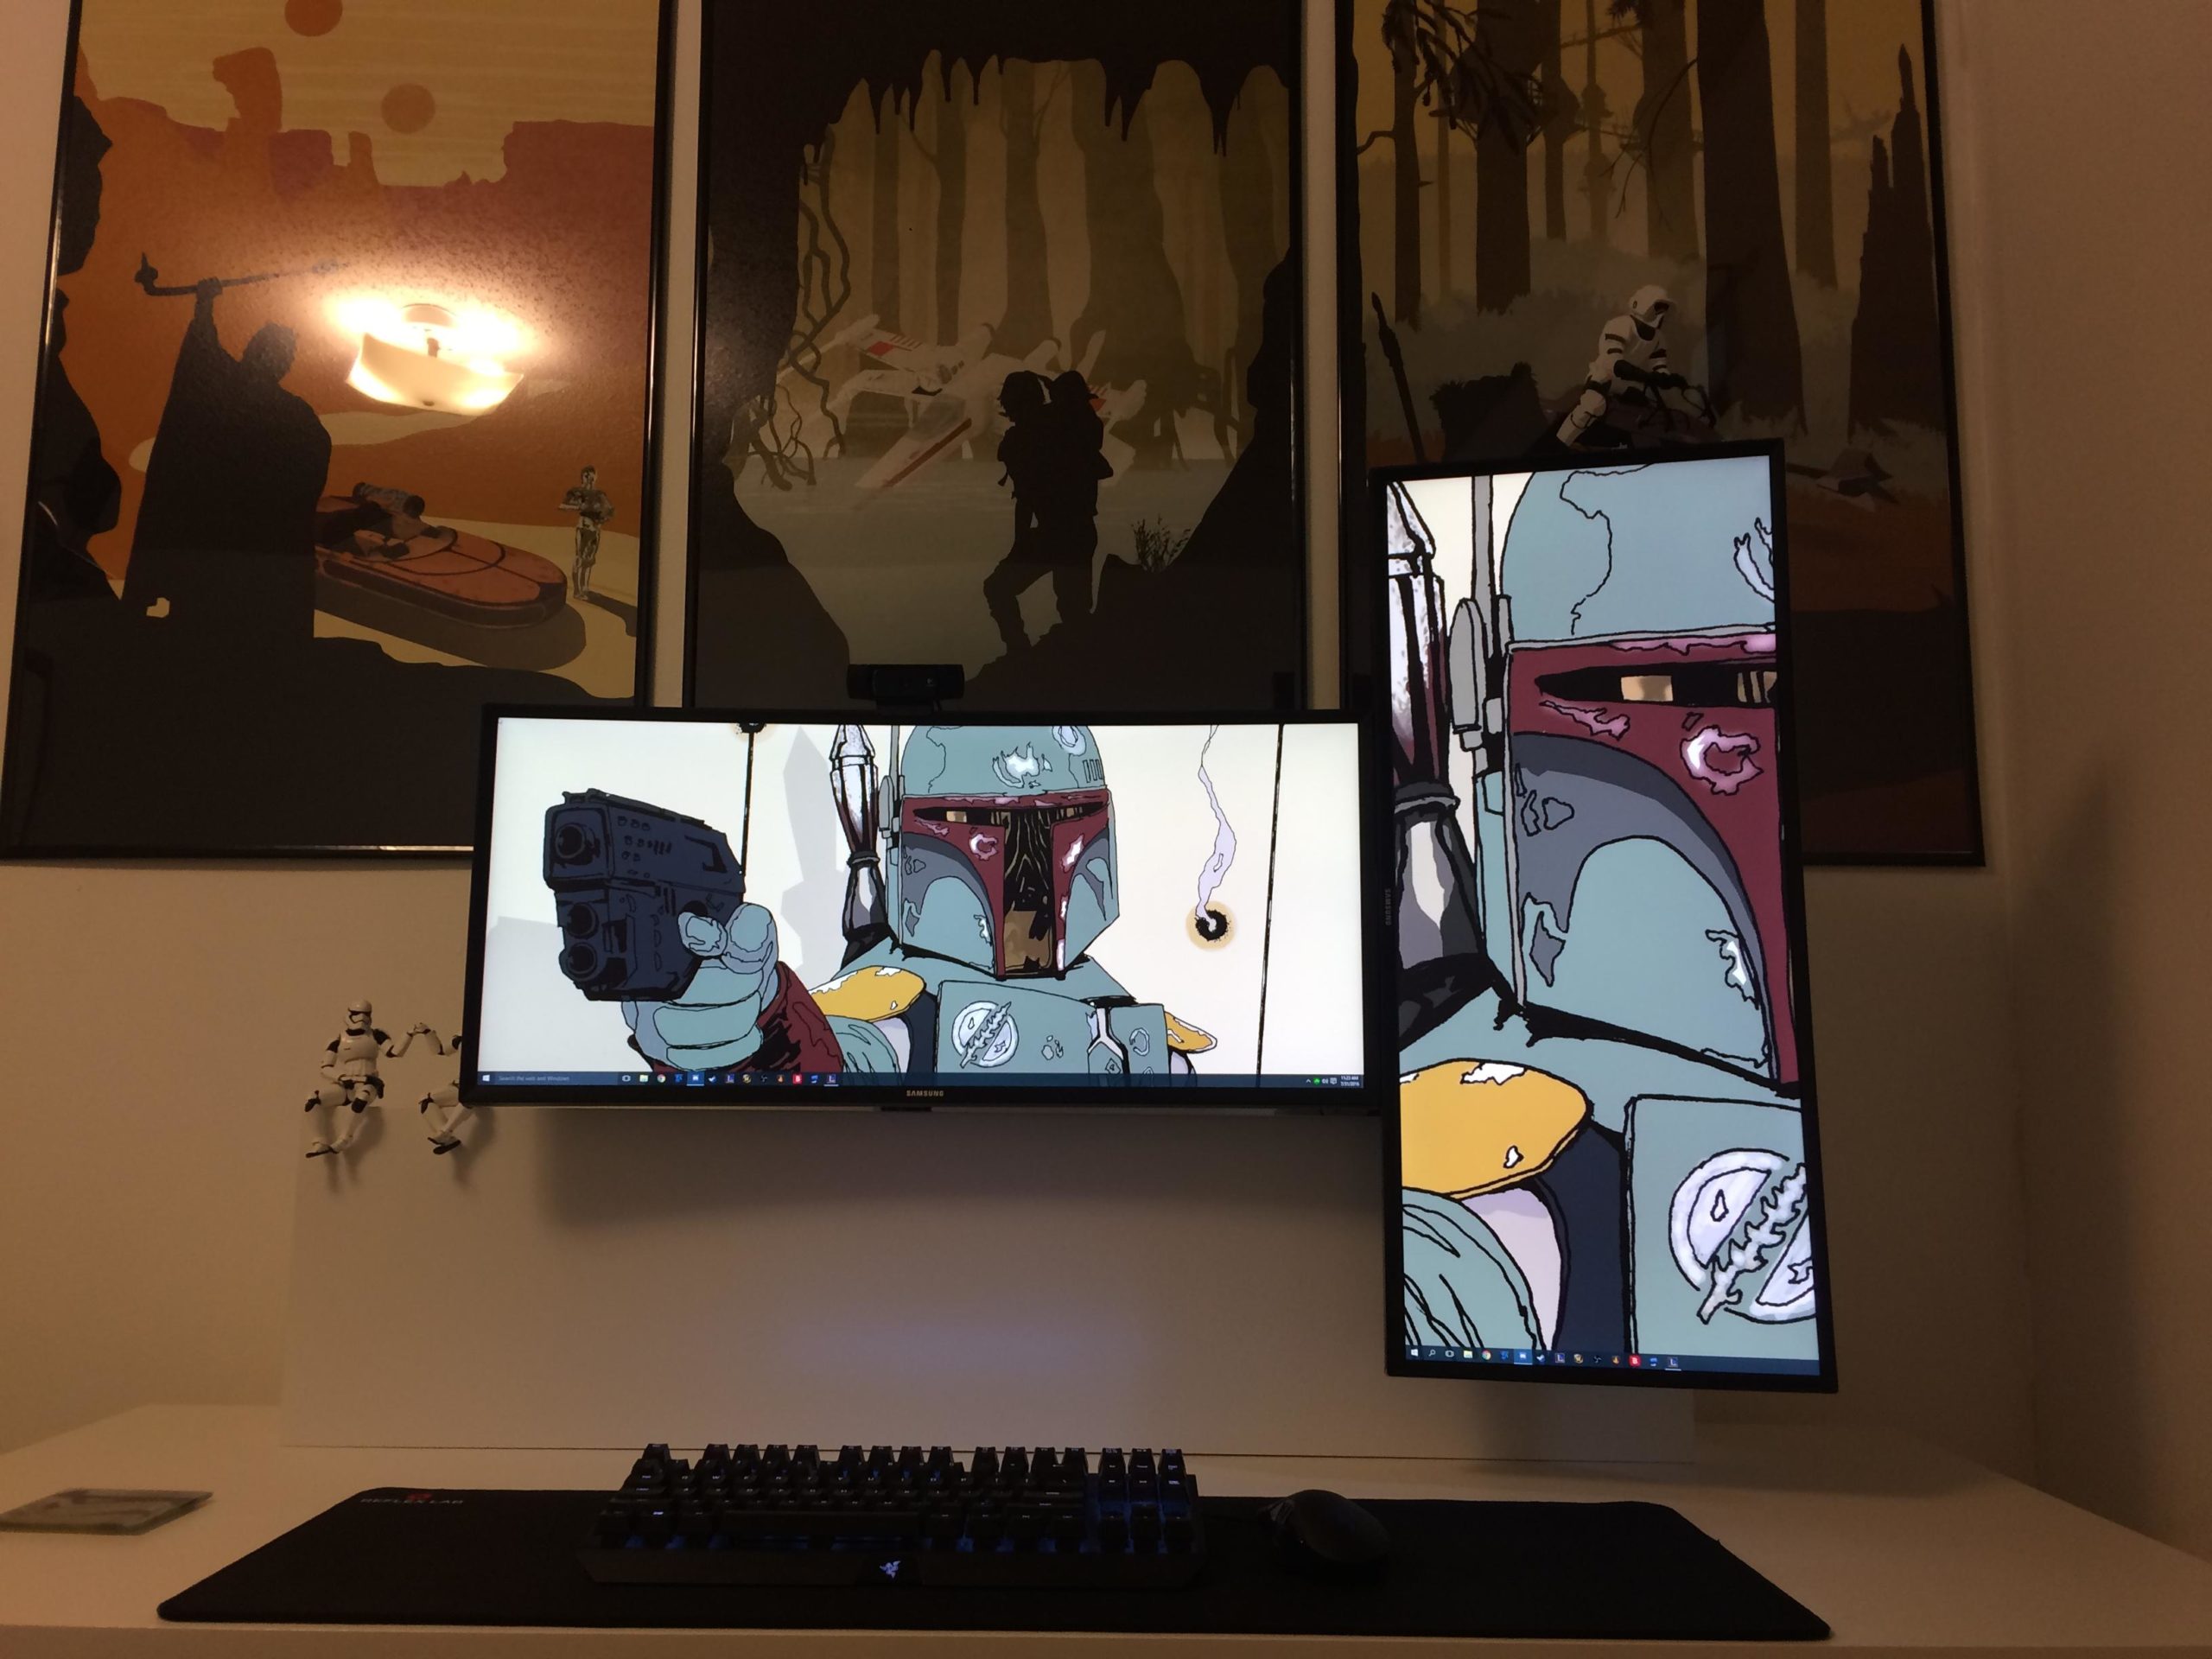 The Double Ultrawide Workspace